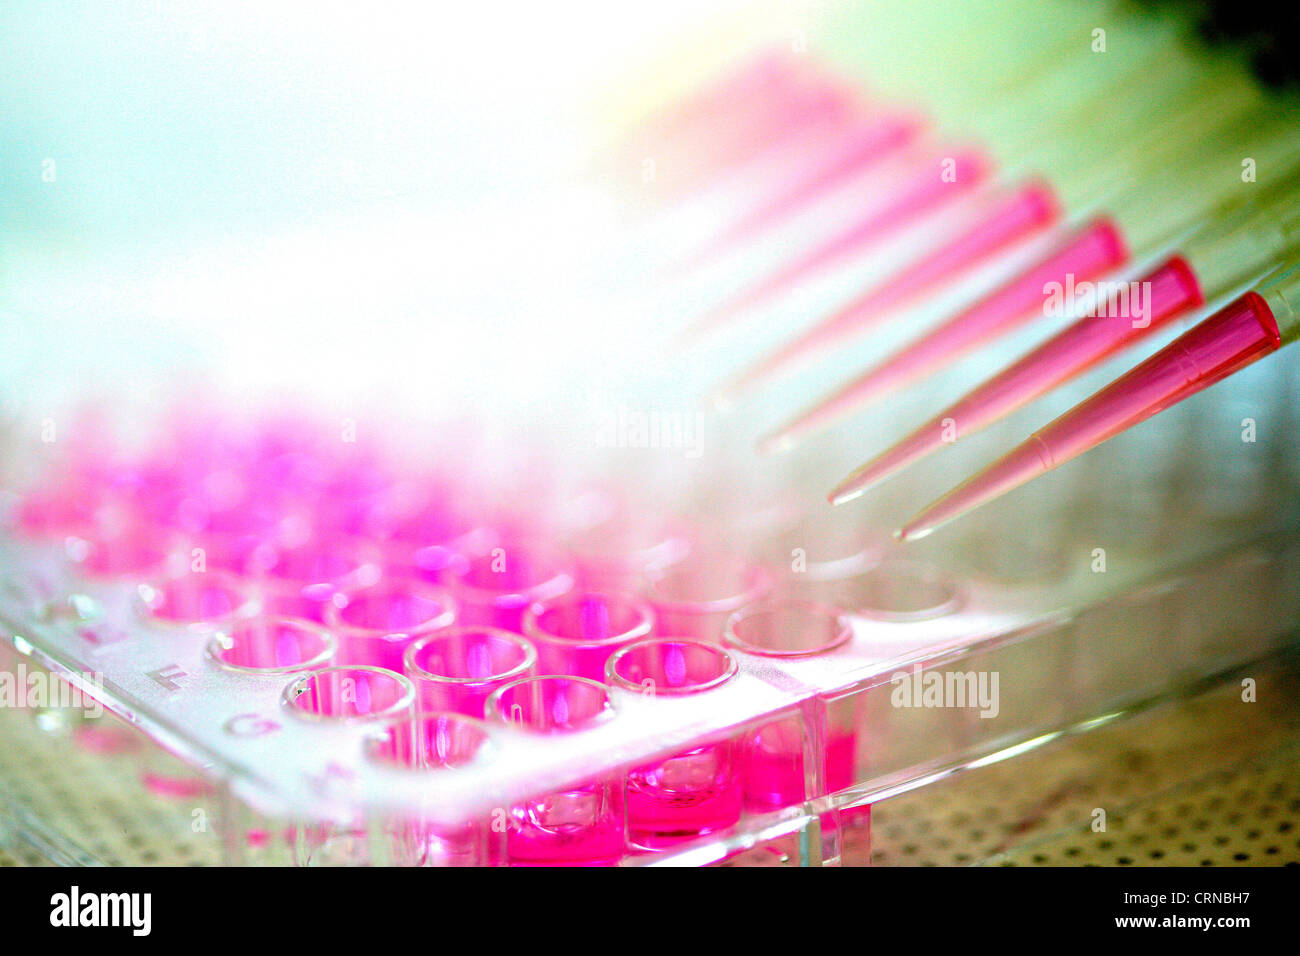 Pipetting a pink liquid into test tubes. Stock Photo